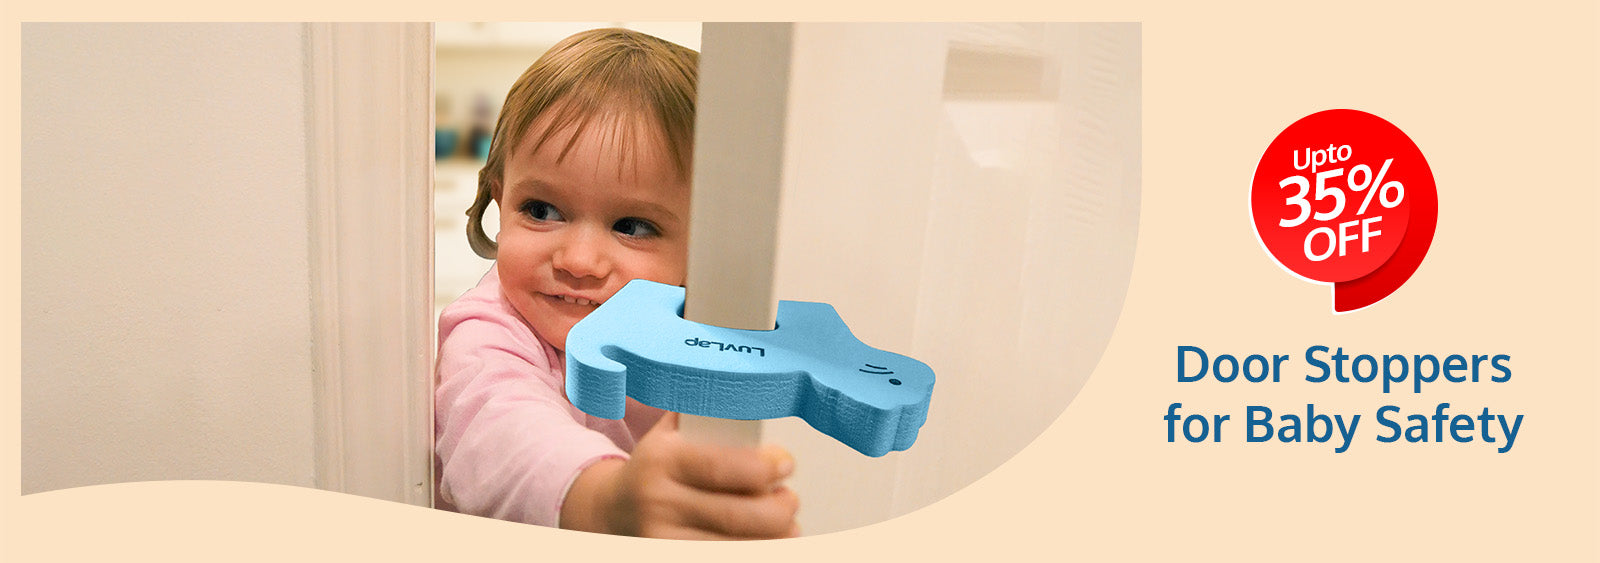 Door Stoppers for Babies' Safety